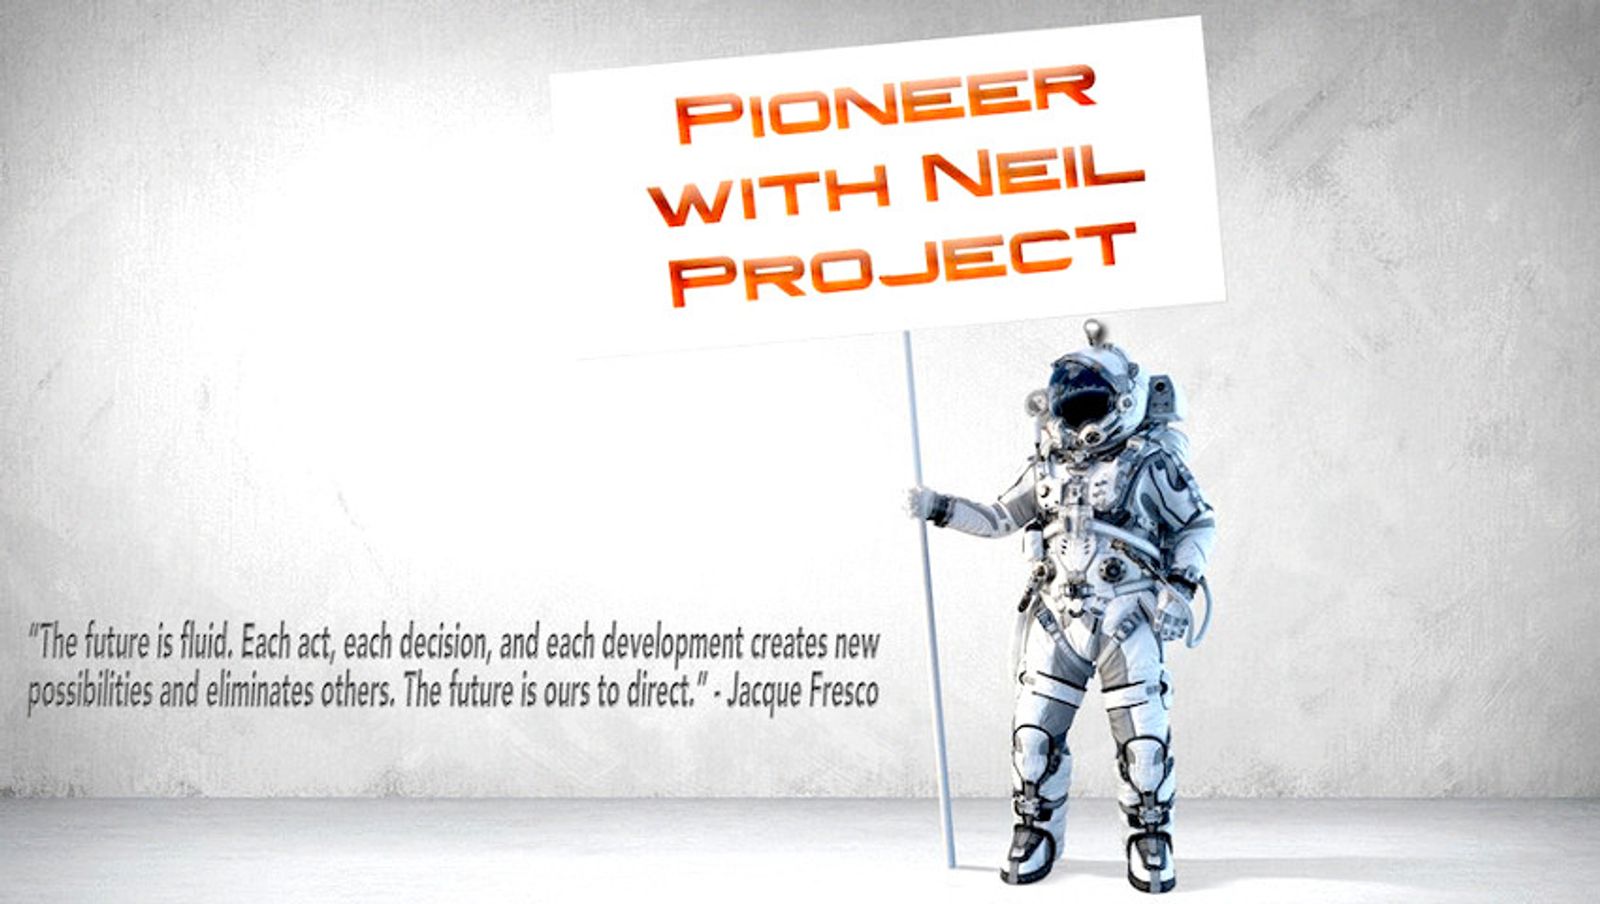 Clips4Sale Launches 'Pioneer with Neil' for Start-Ups